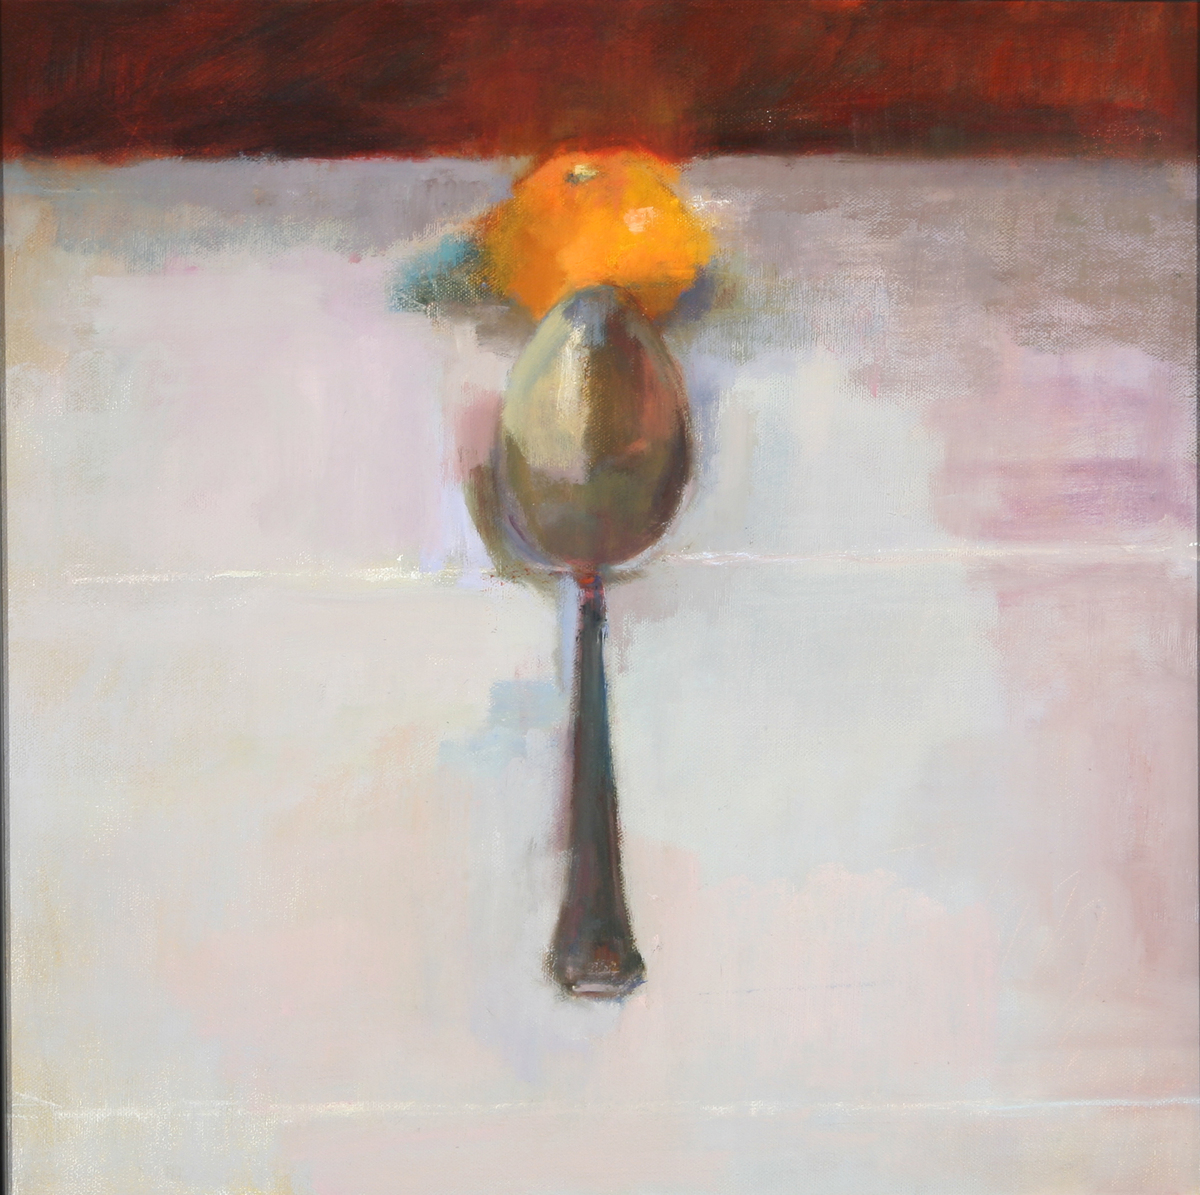 Spoon and Orange - Oil Painting